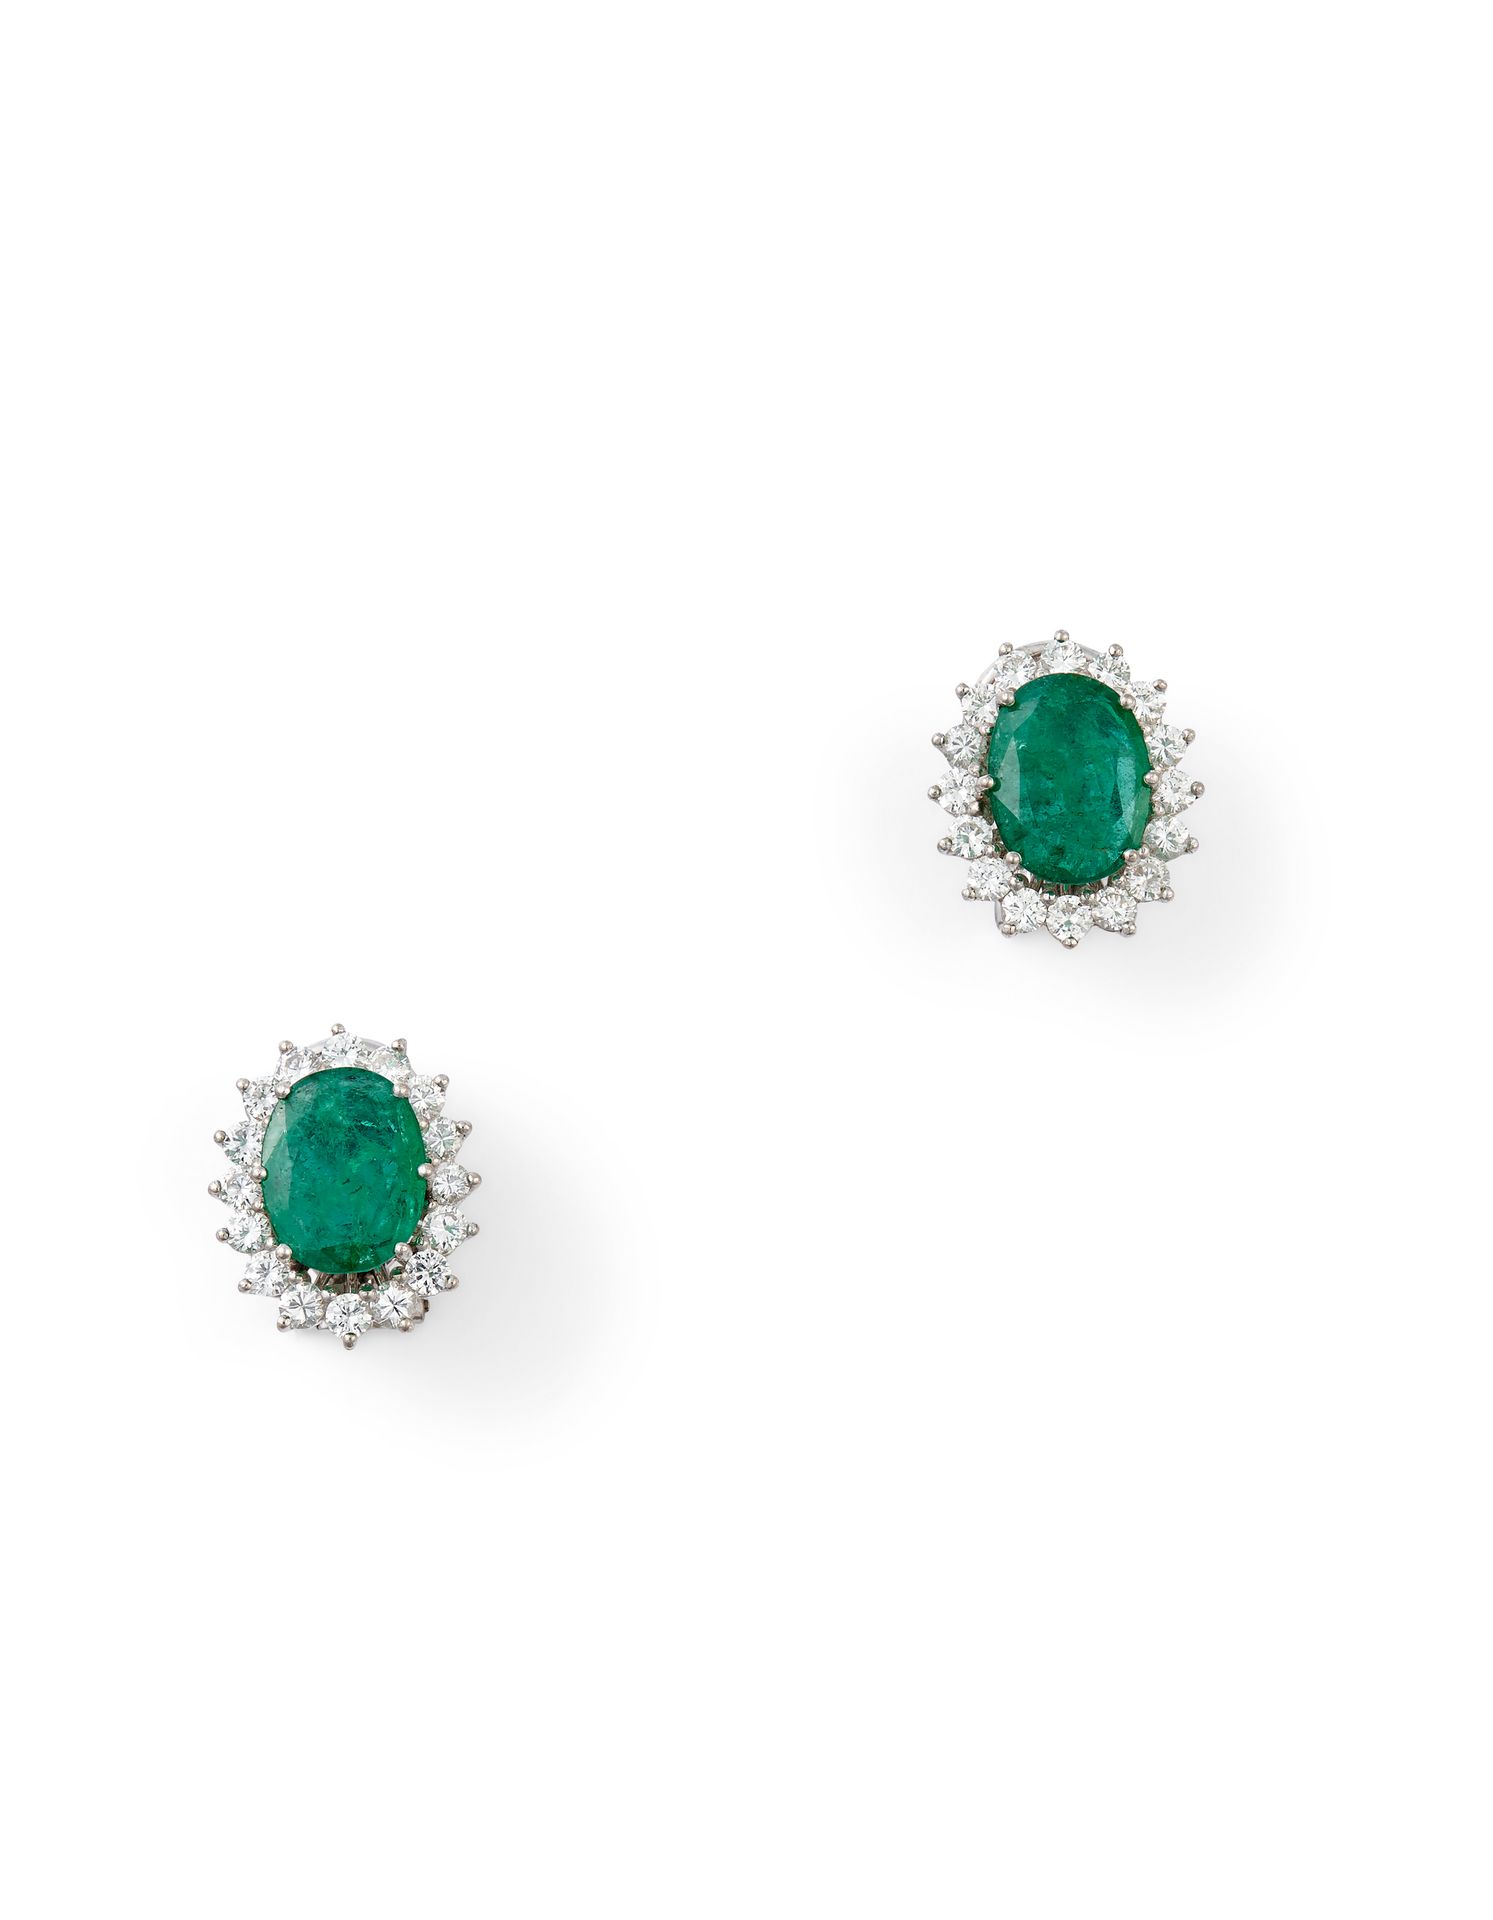 Null EMERALD AND DIAMOND EARRINGS In 18K white gold, each set with an oval emera&hellip;